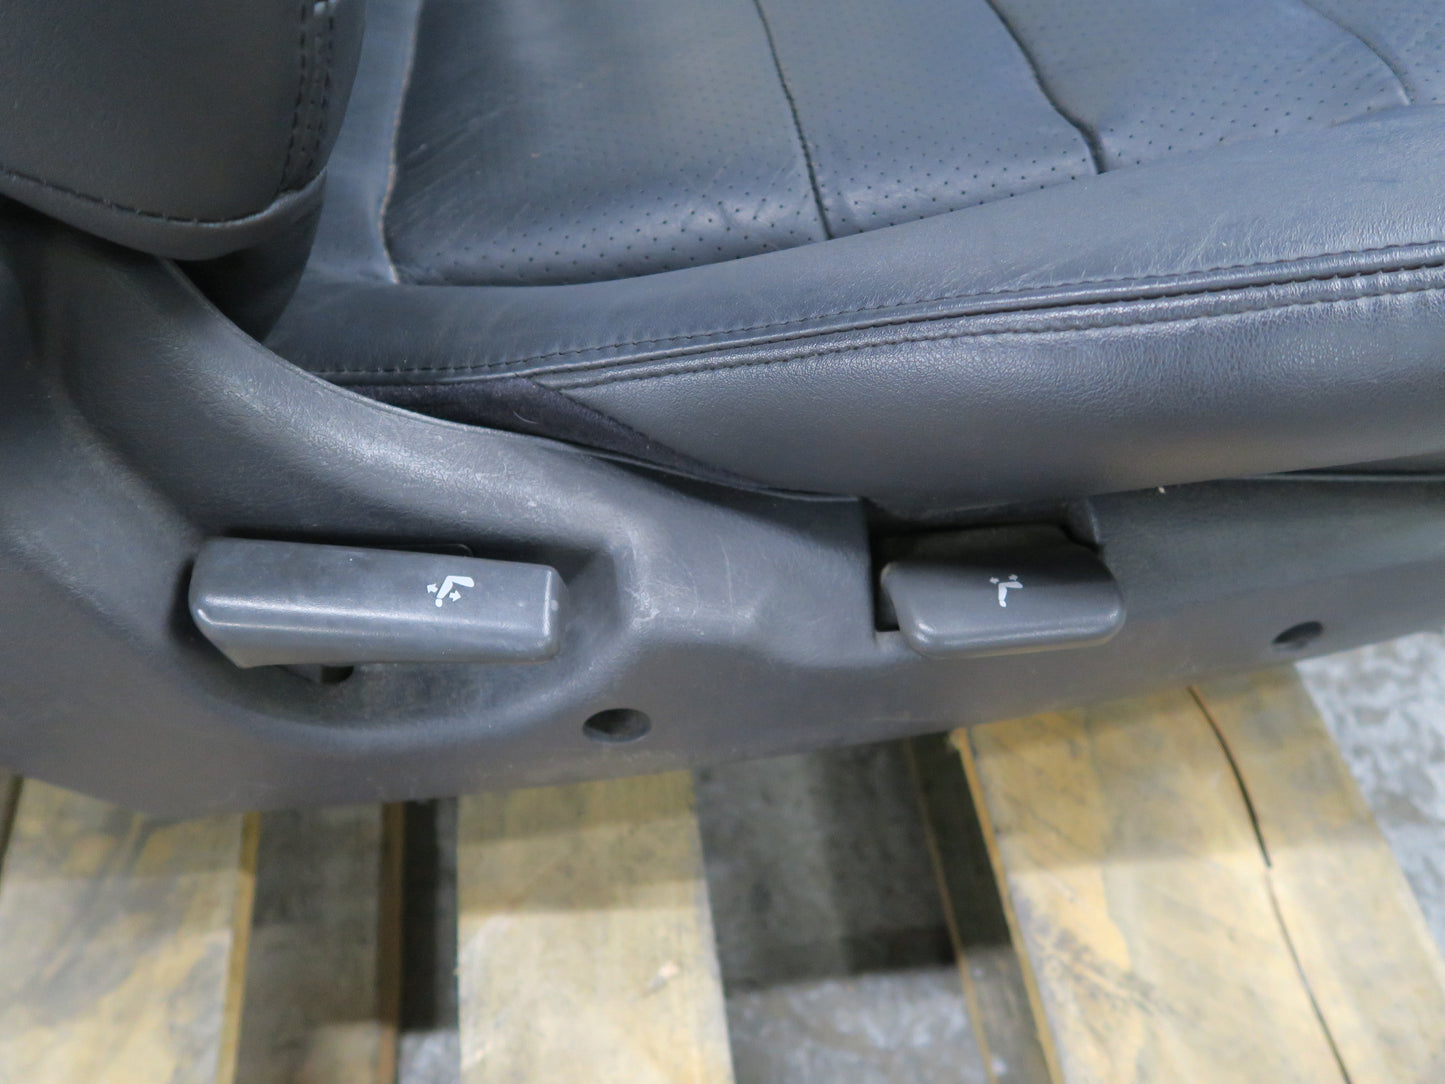 1991-1996 DODGE STEALTH R/T FRONT & REAR LEFT RIGHT SIDE LEATHER SEAT BLACK SET